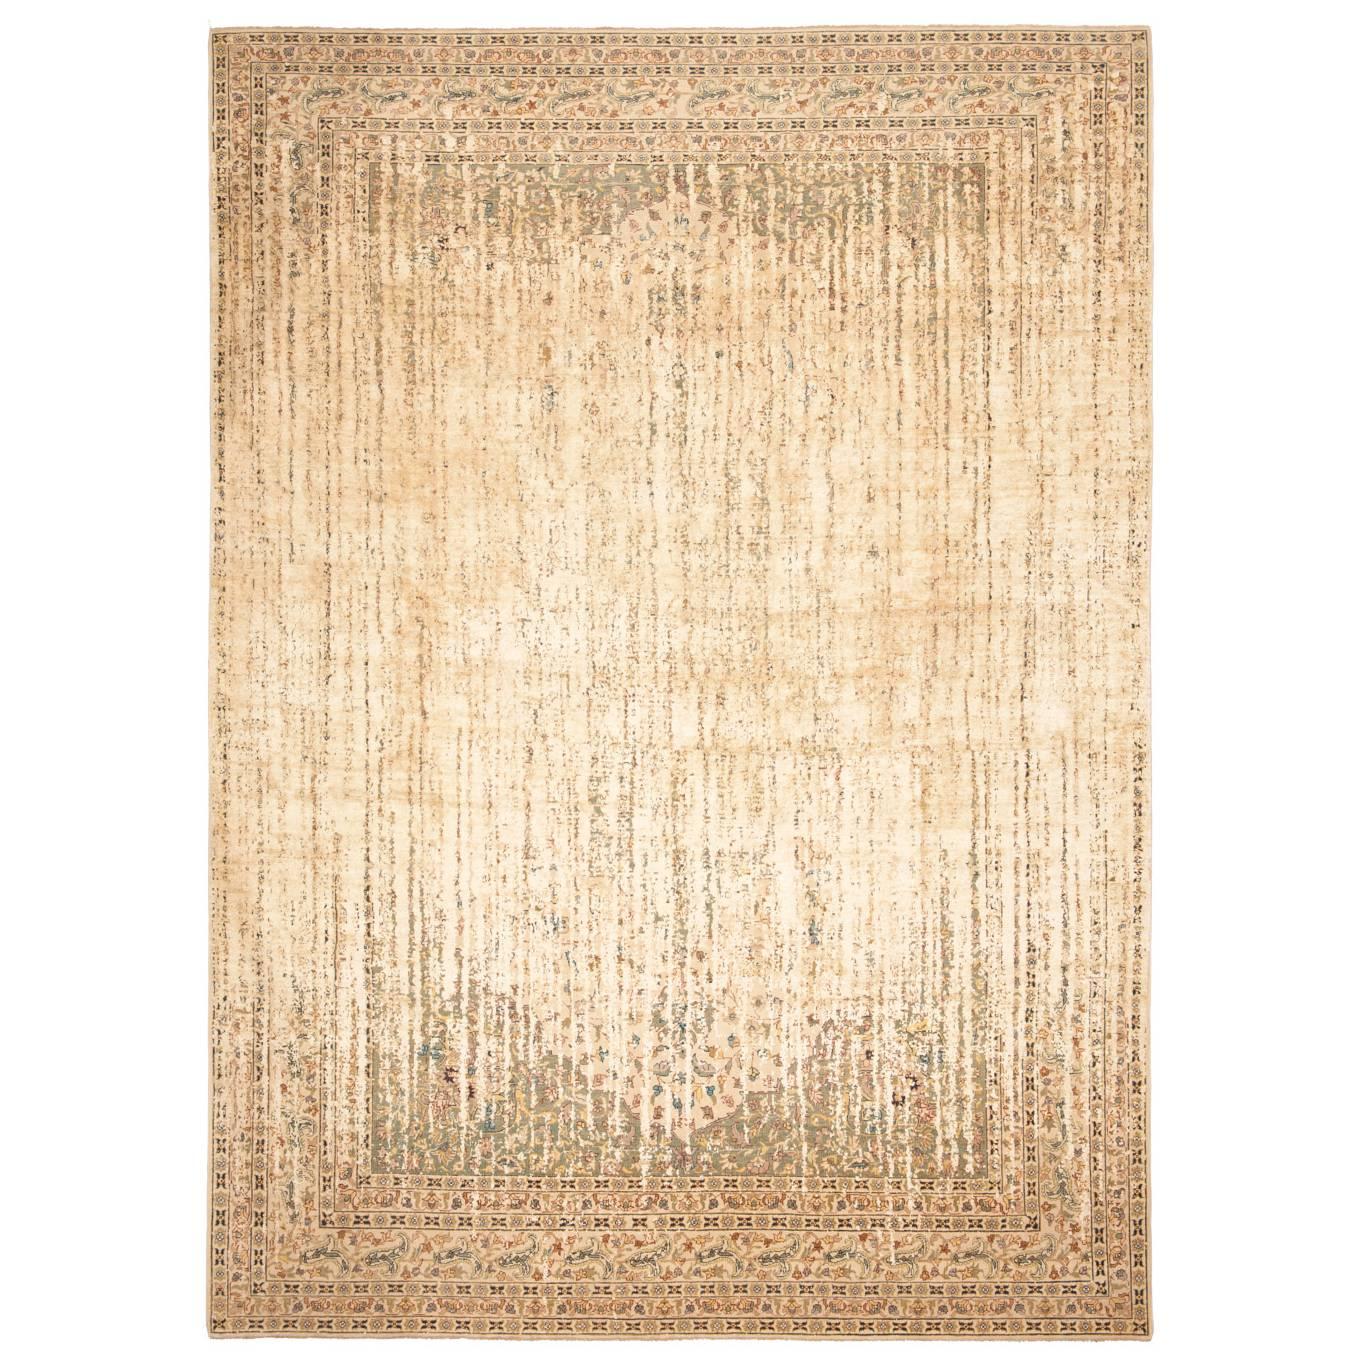 Tabriz Park Double Vendetta from Erased Heritage Carpet Collection by Jan Kath